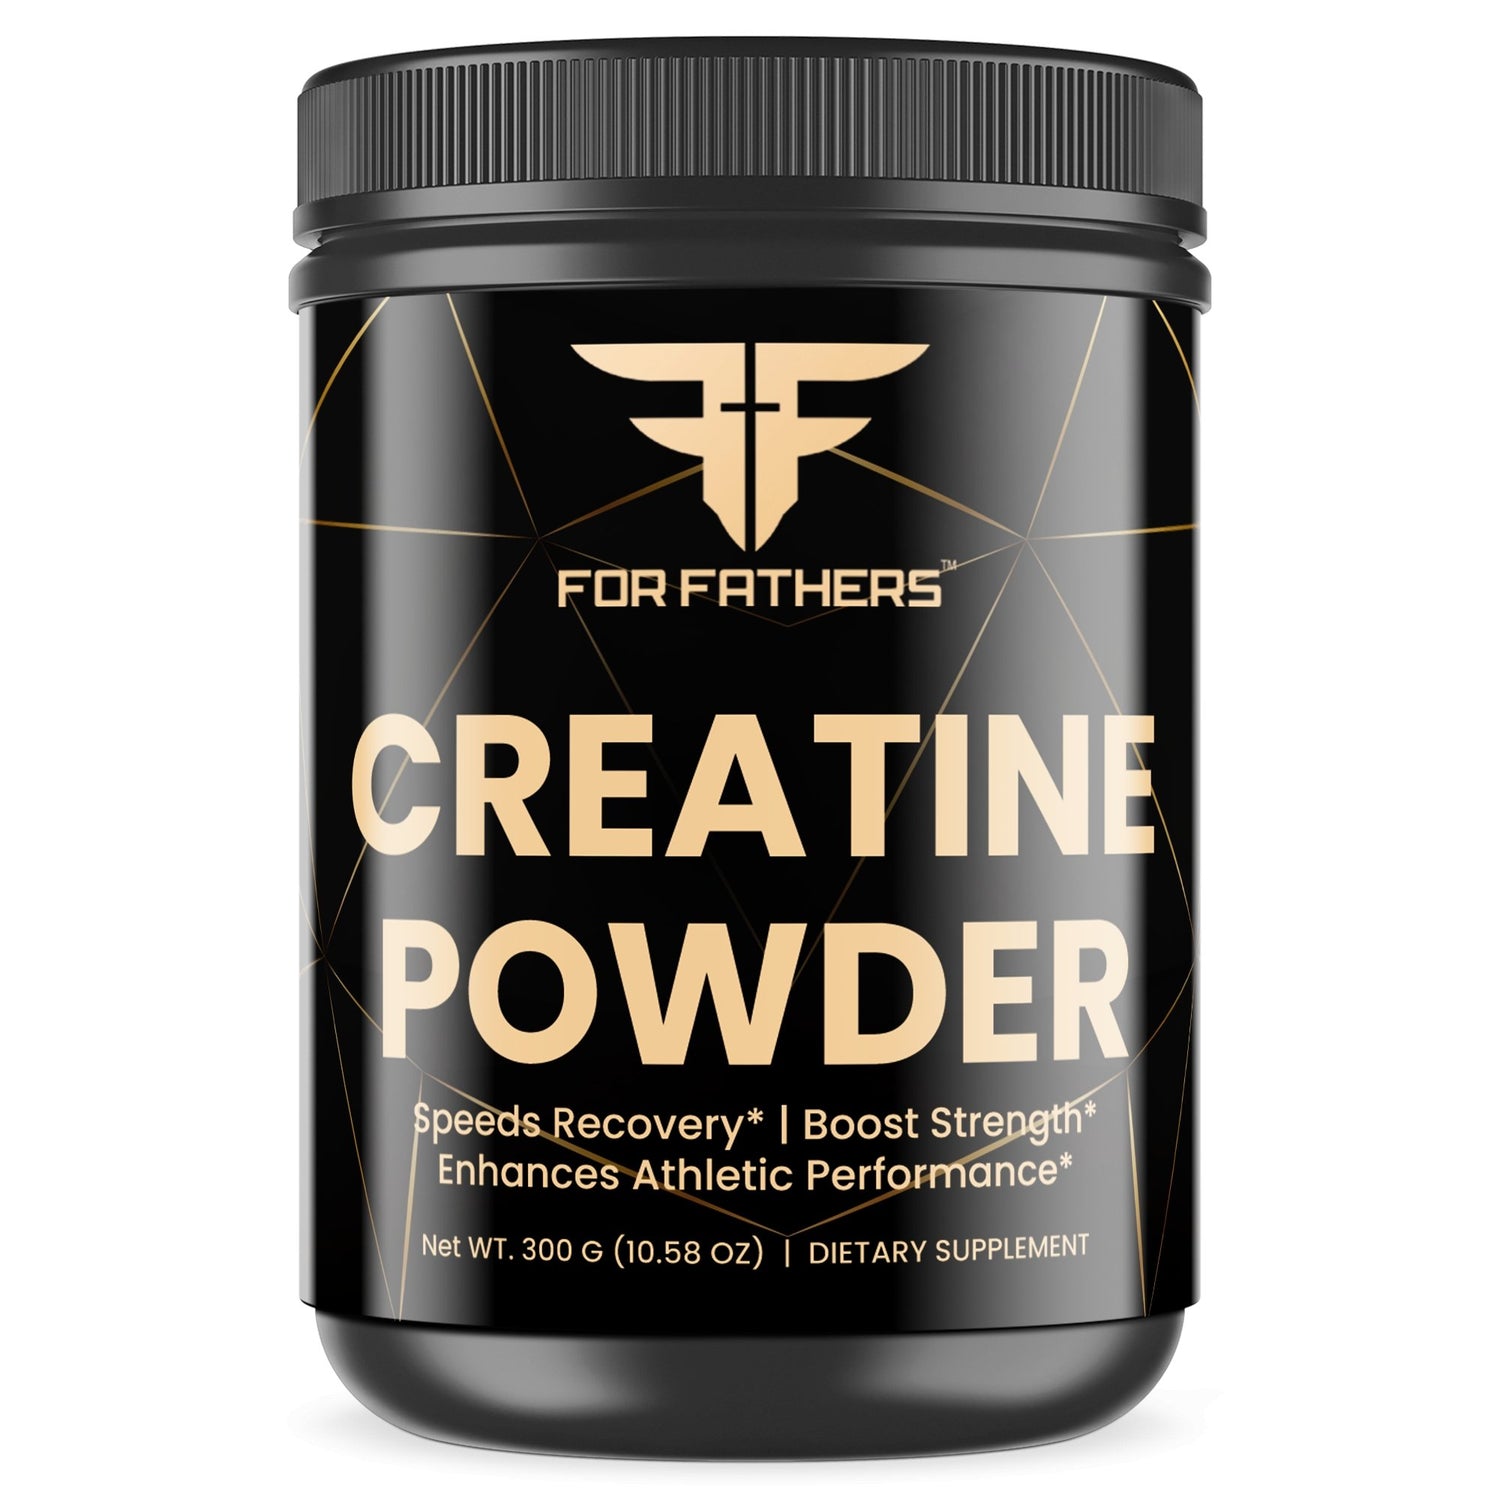 For Fathers Fitness Creatine: Top Quality, No Filler, Muscle Builder - For Fathers Fitness